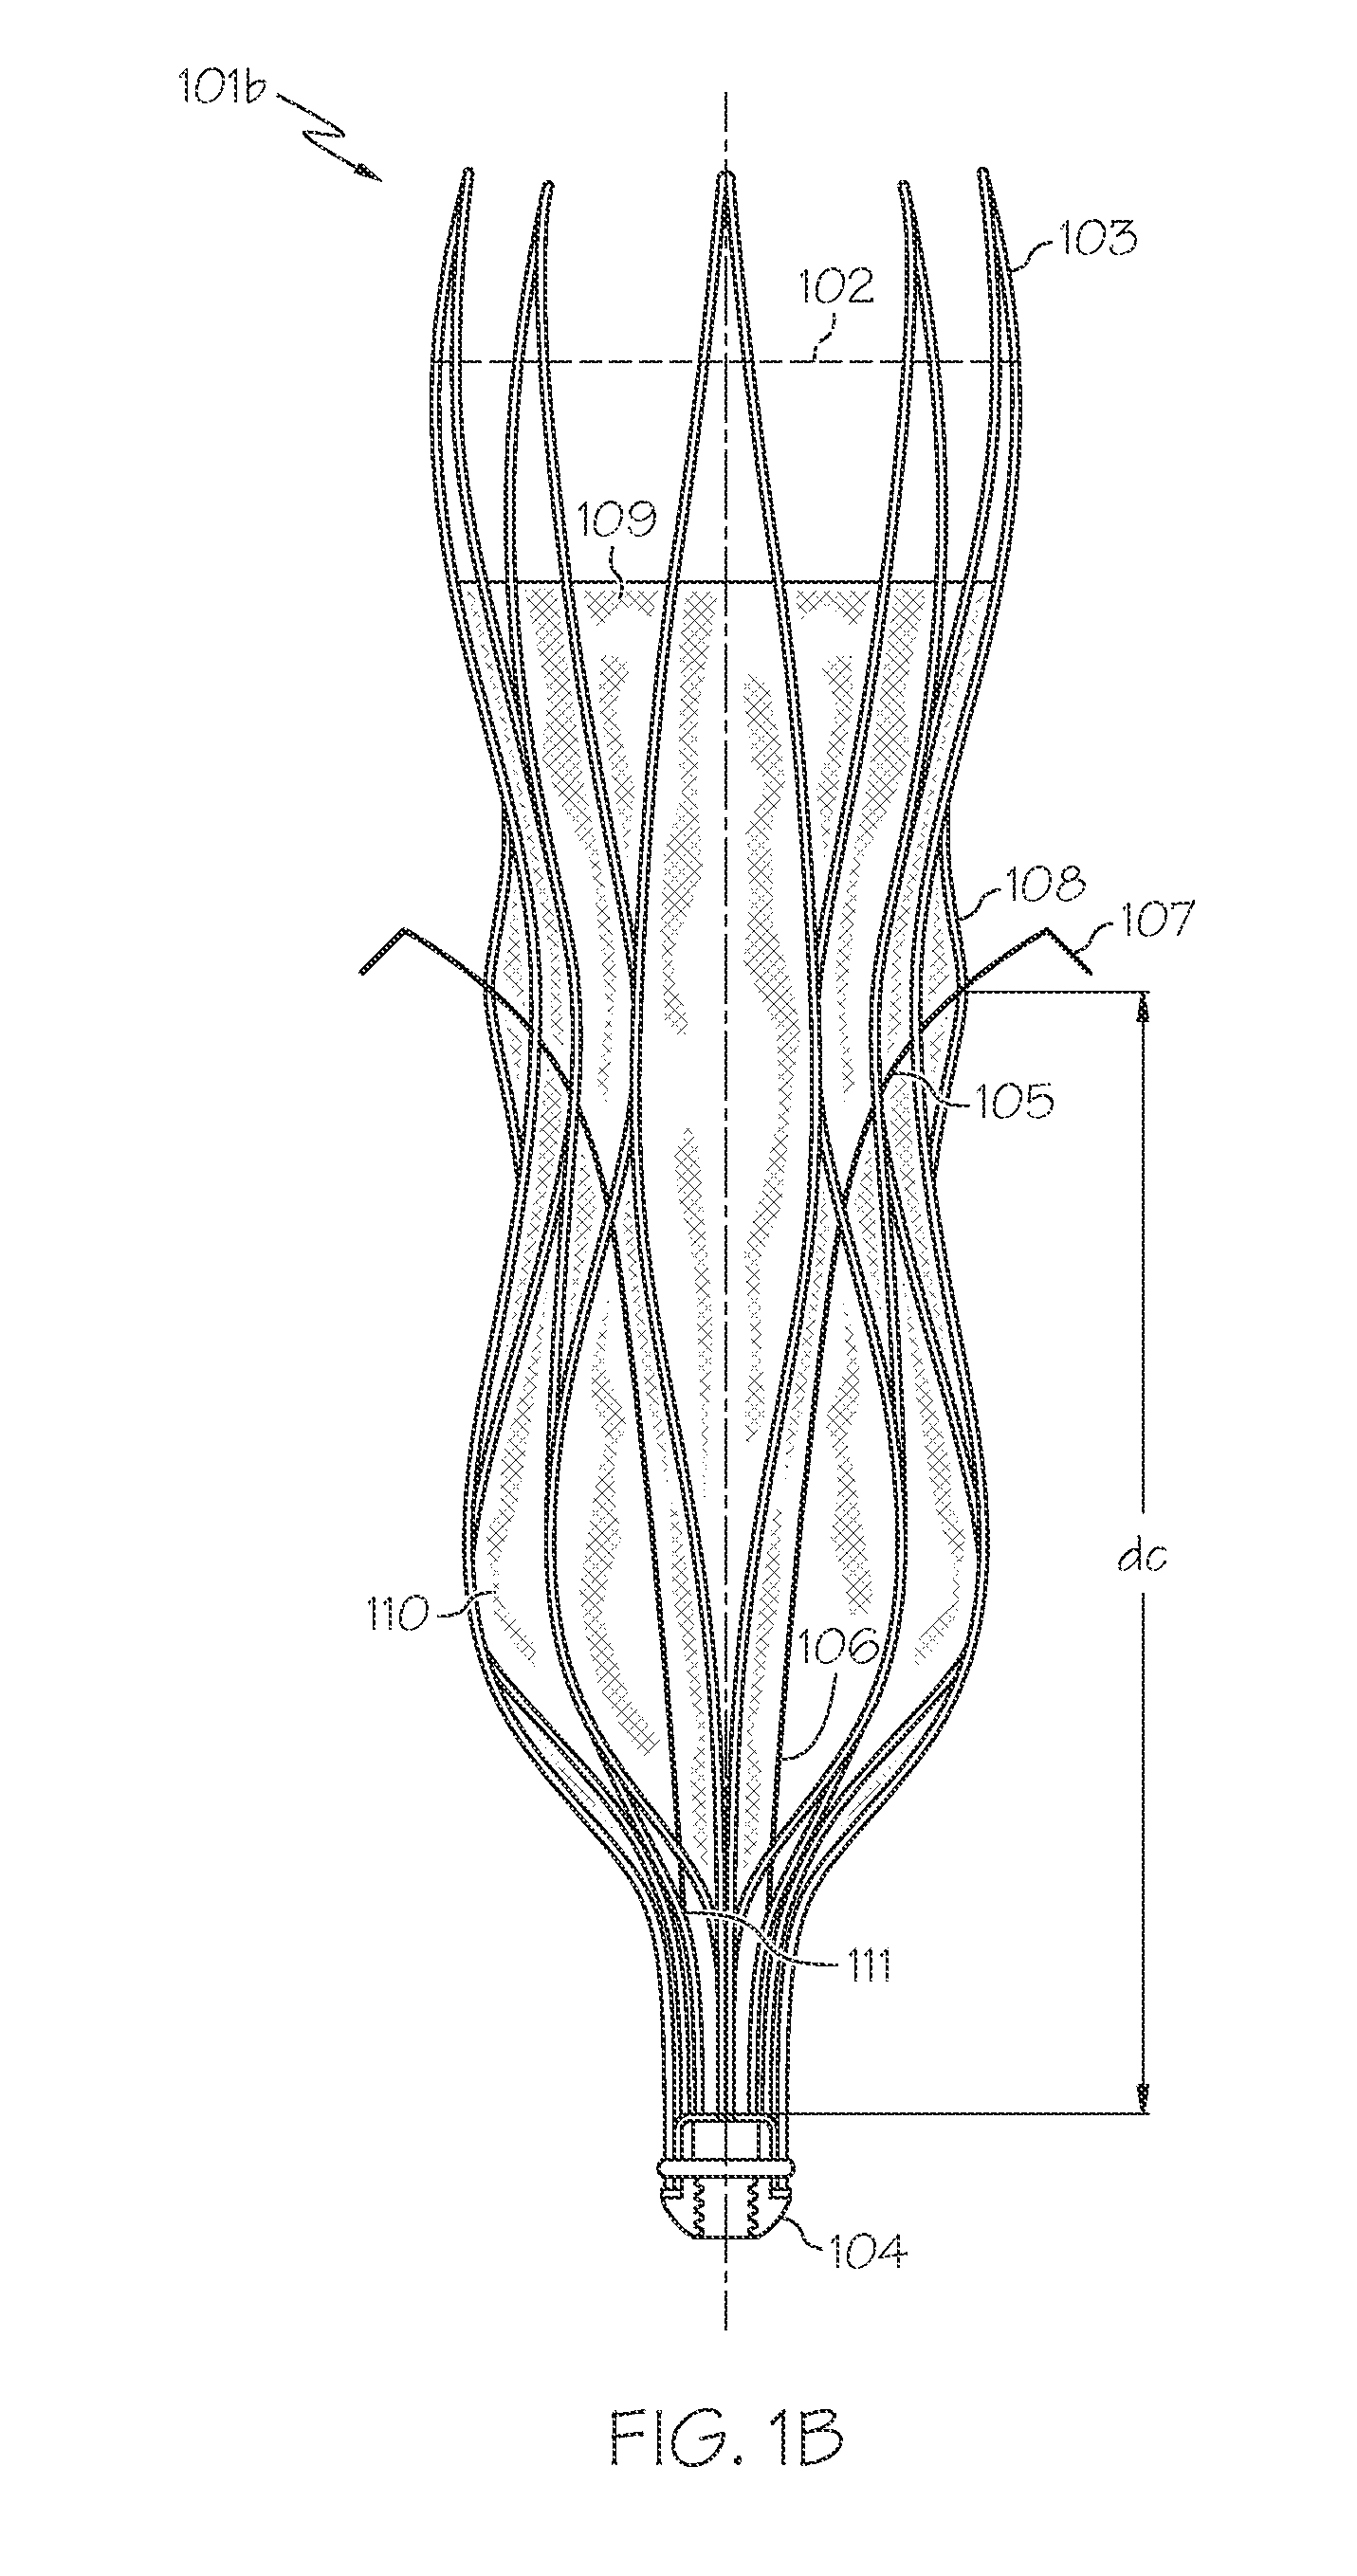 Fixation Anchor Design for an Occlusion Device